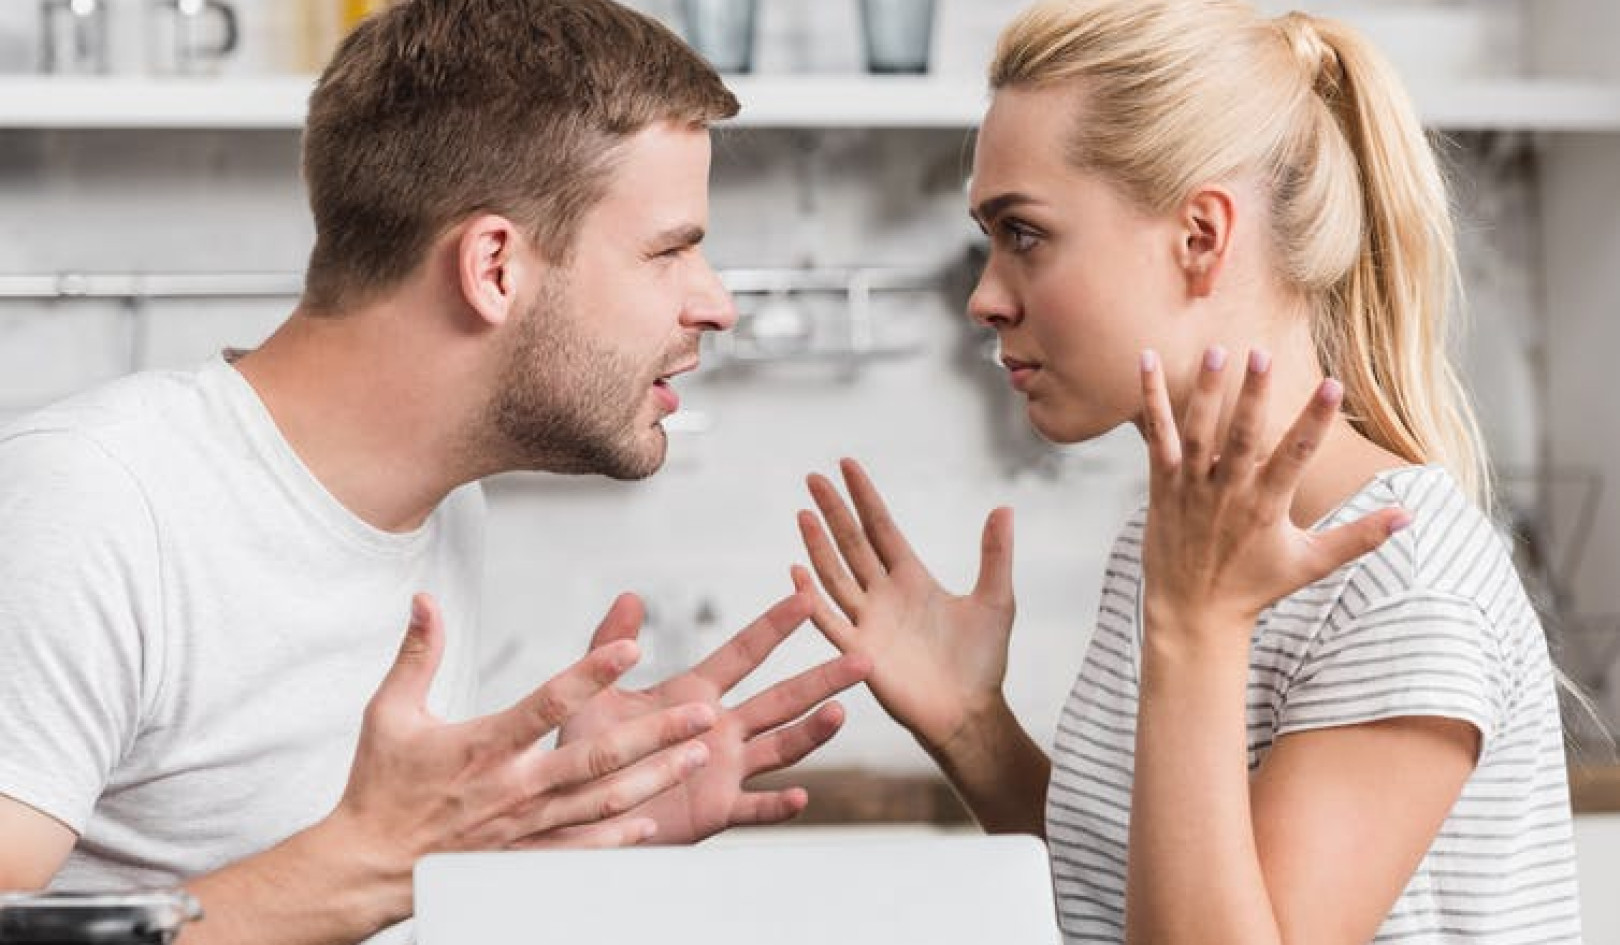 Actually, It's Ok To Disagree. Here Are 5 Ways We Can Argue Better